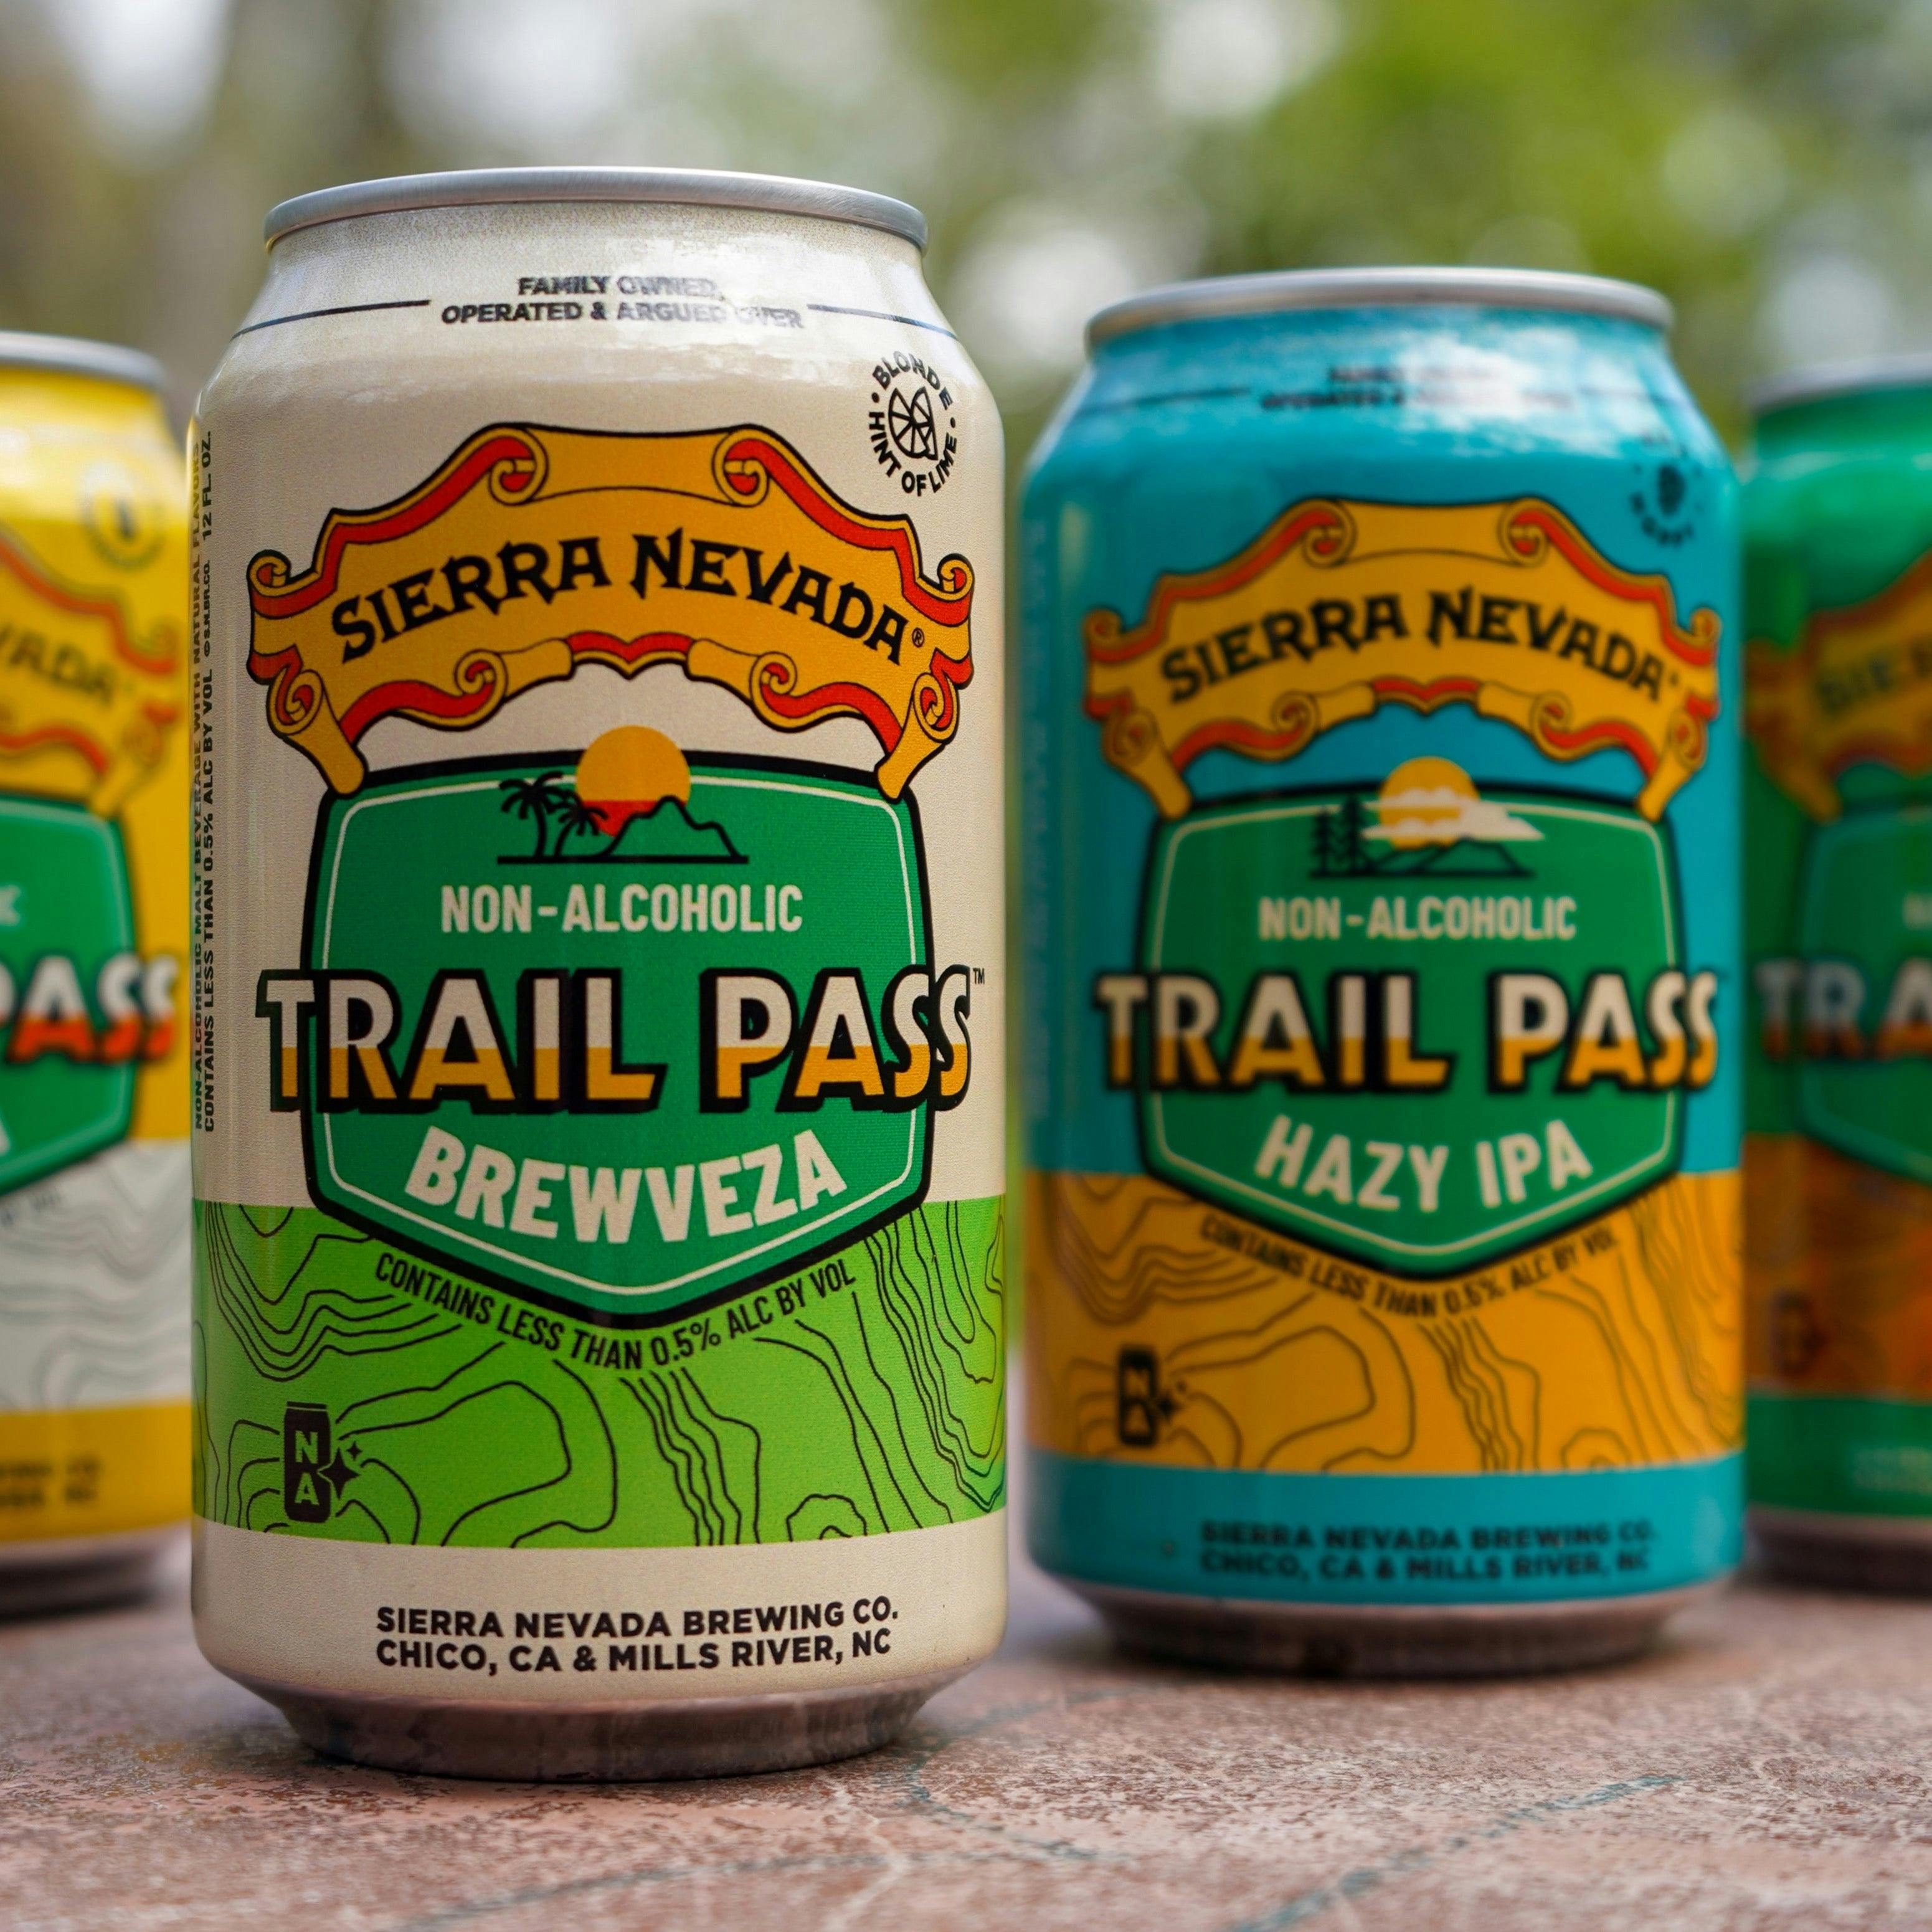 Sierra Nevada Brewing Co. individual cans of each of the 4 flavors included in the mixed pack